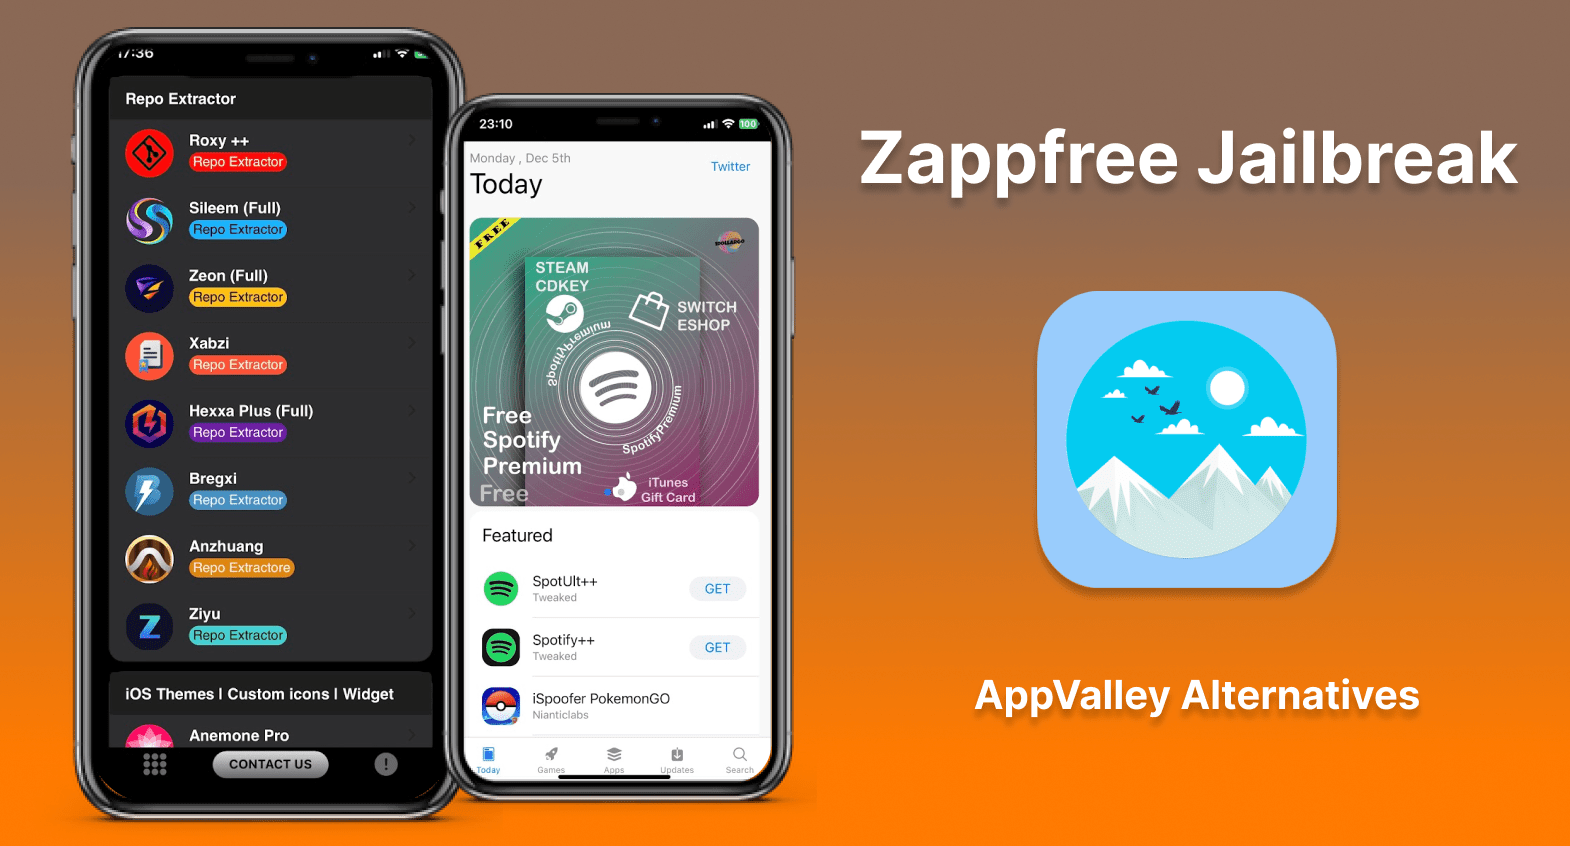 Download AppValley with Zappfree